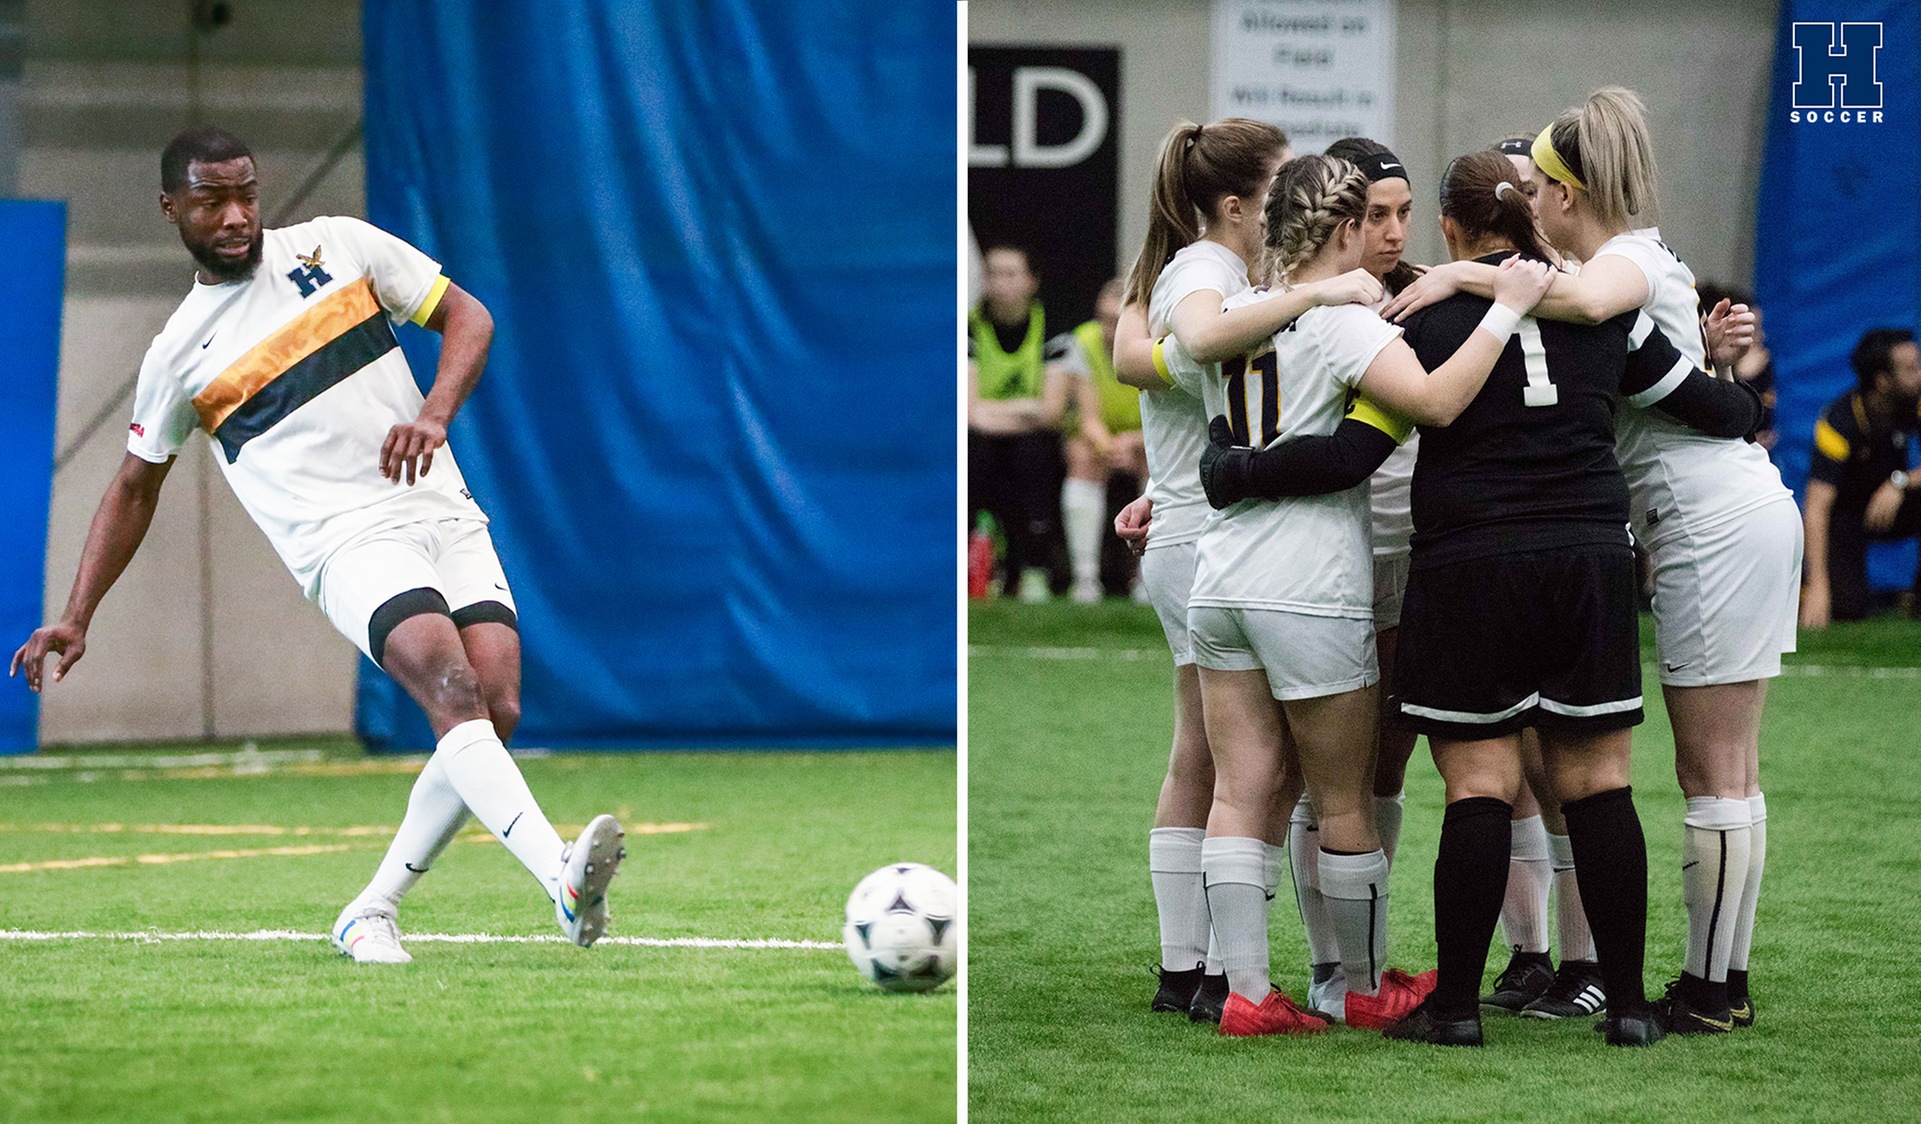 Humber Soccer Announces Open Tryout Dates for Indoor Team